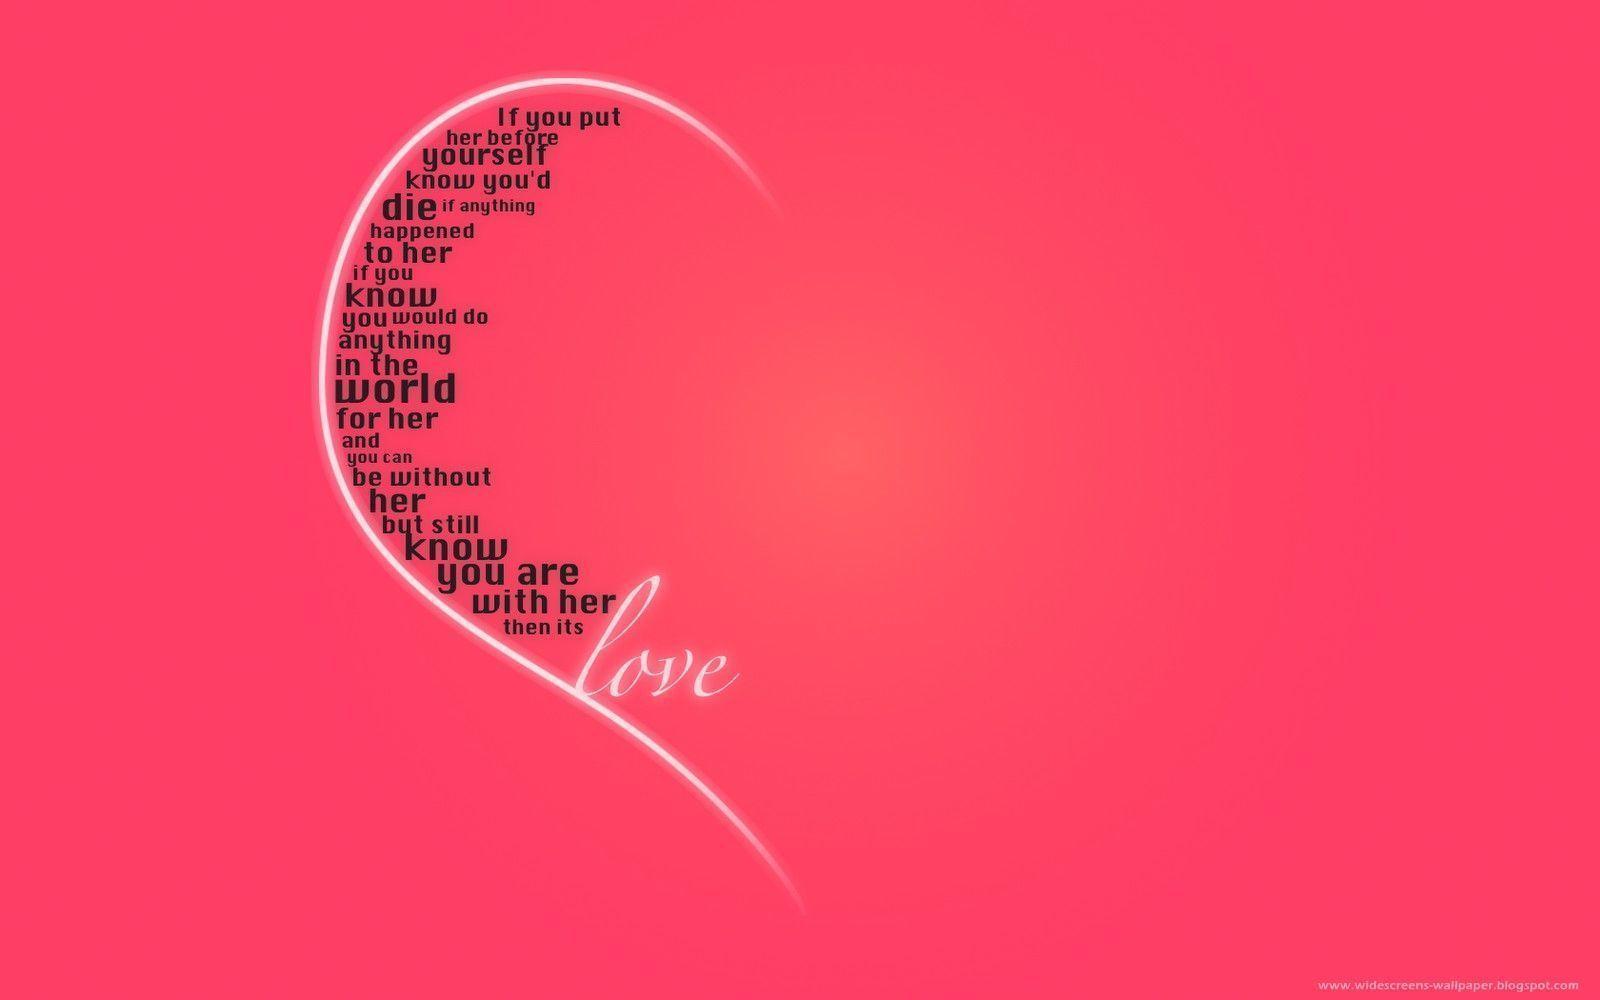 Quotes About Love 13 HD Image Wallpaper. HD Image Wallpaper